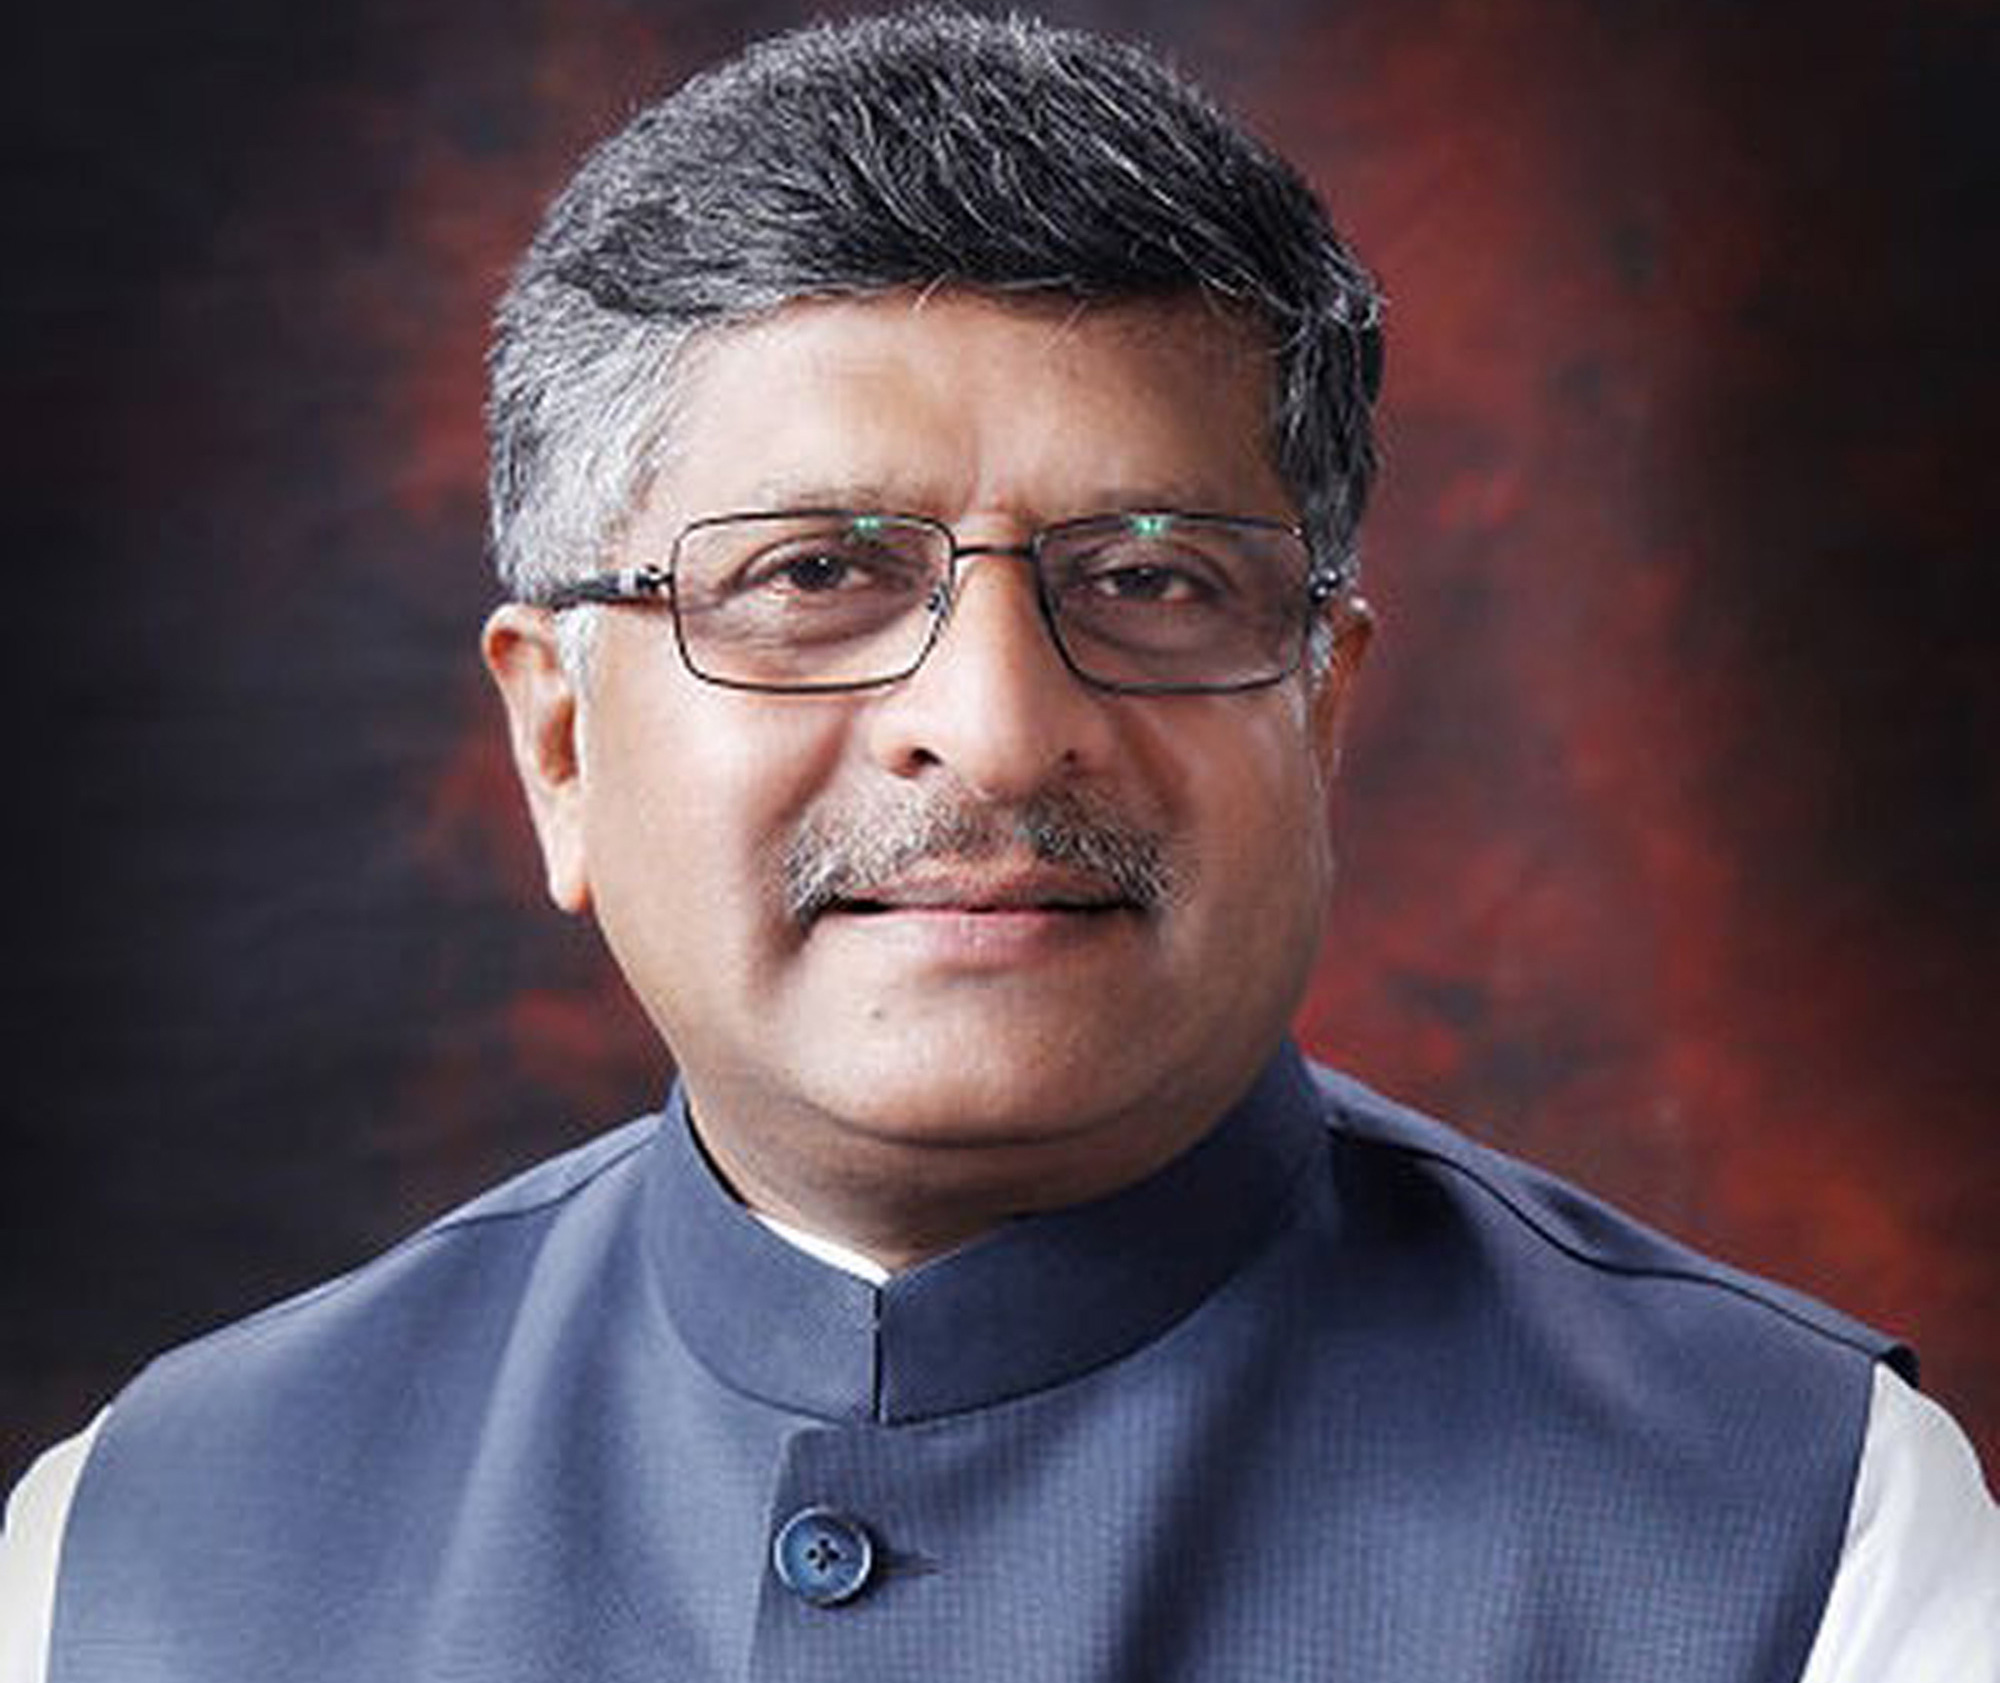 Ravi Shankar Prasad has touted Pakistani traders' distress, due to a steep increase in customs duty in India, as indicative of a 'big victory', but will it win over voters?